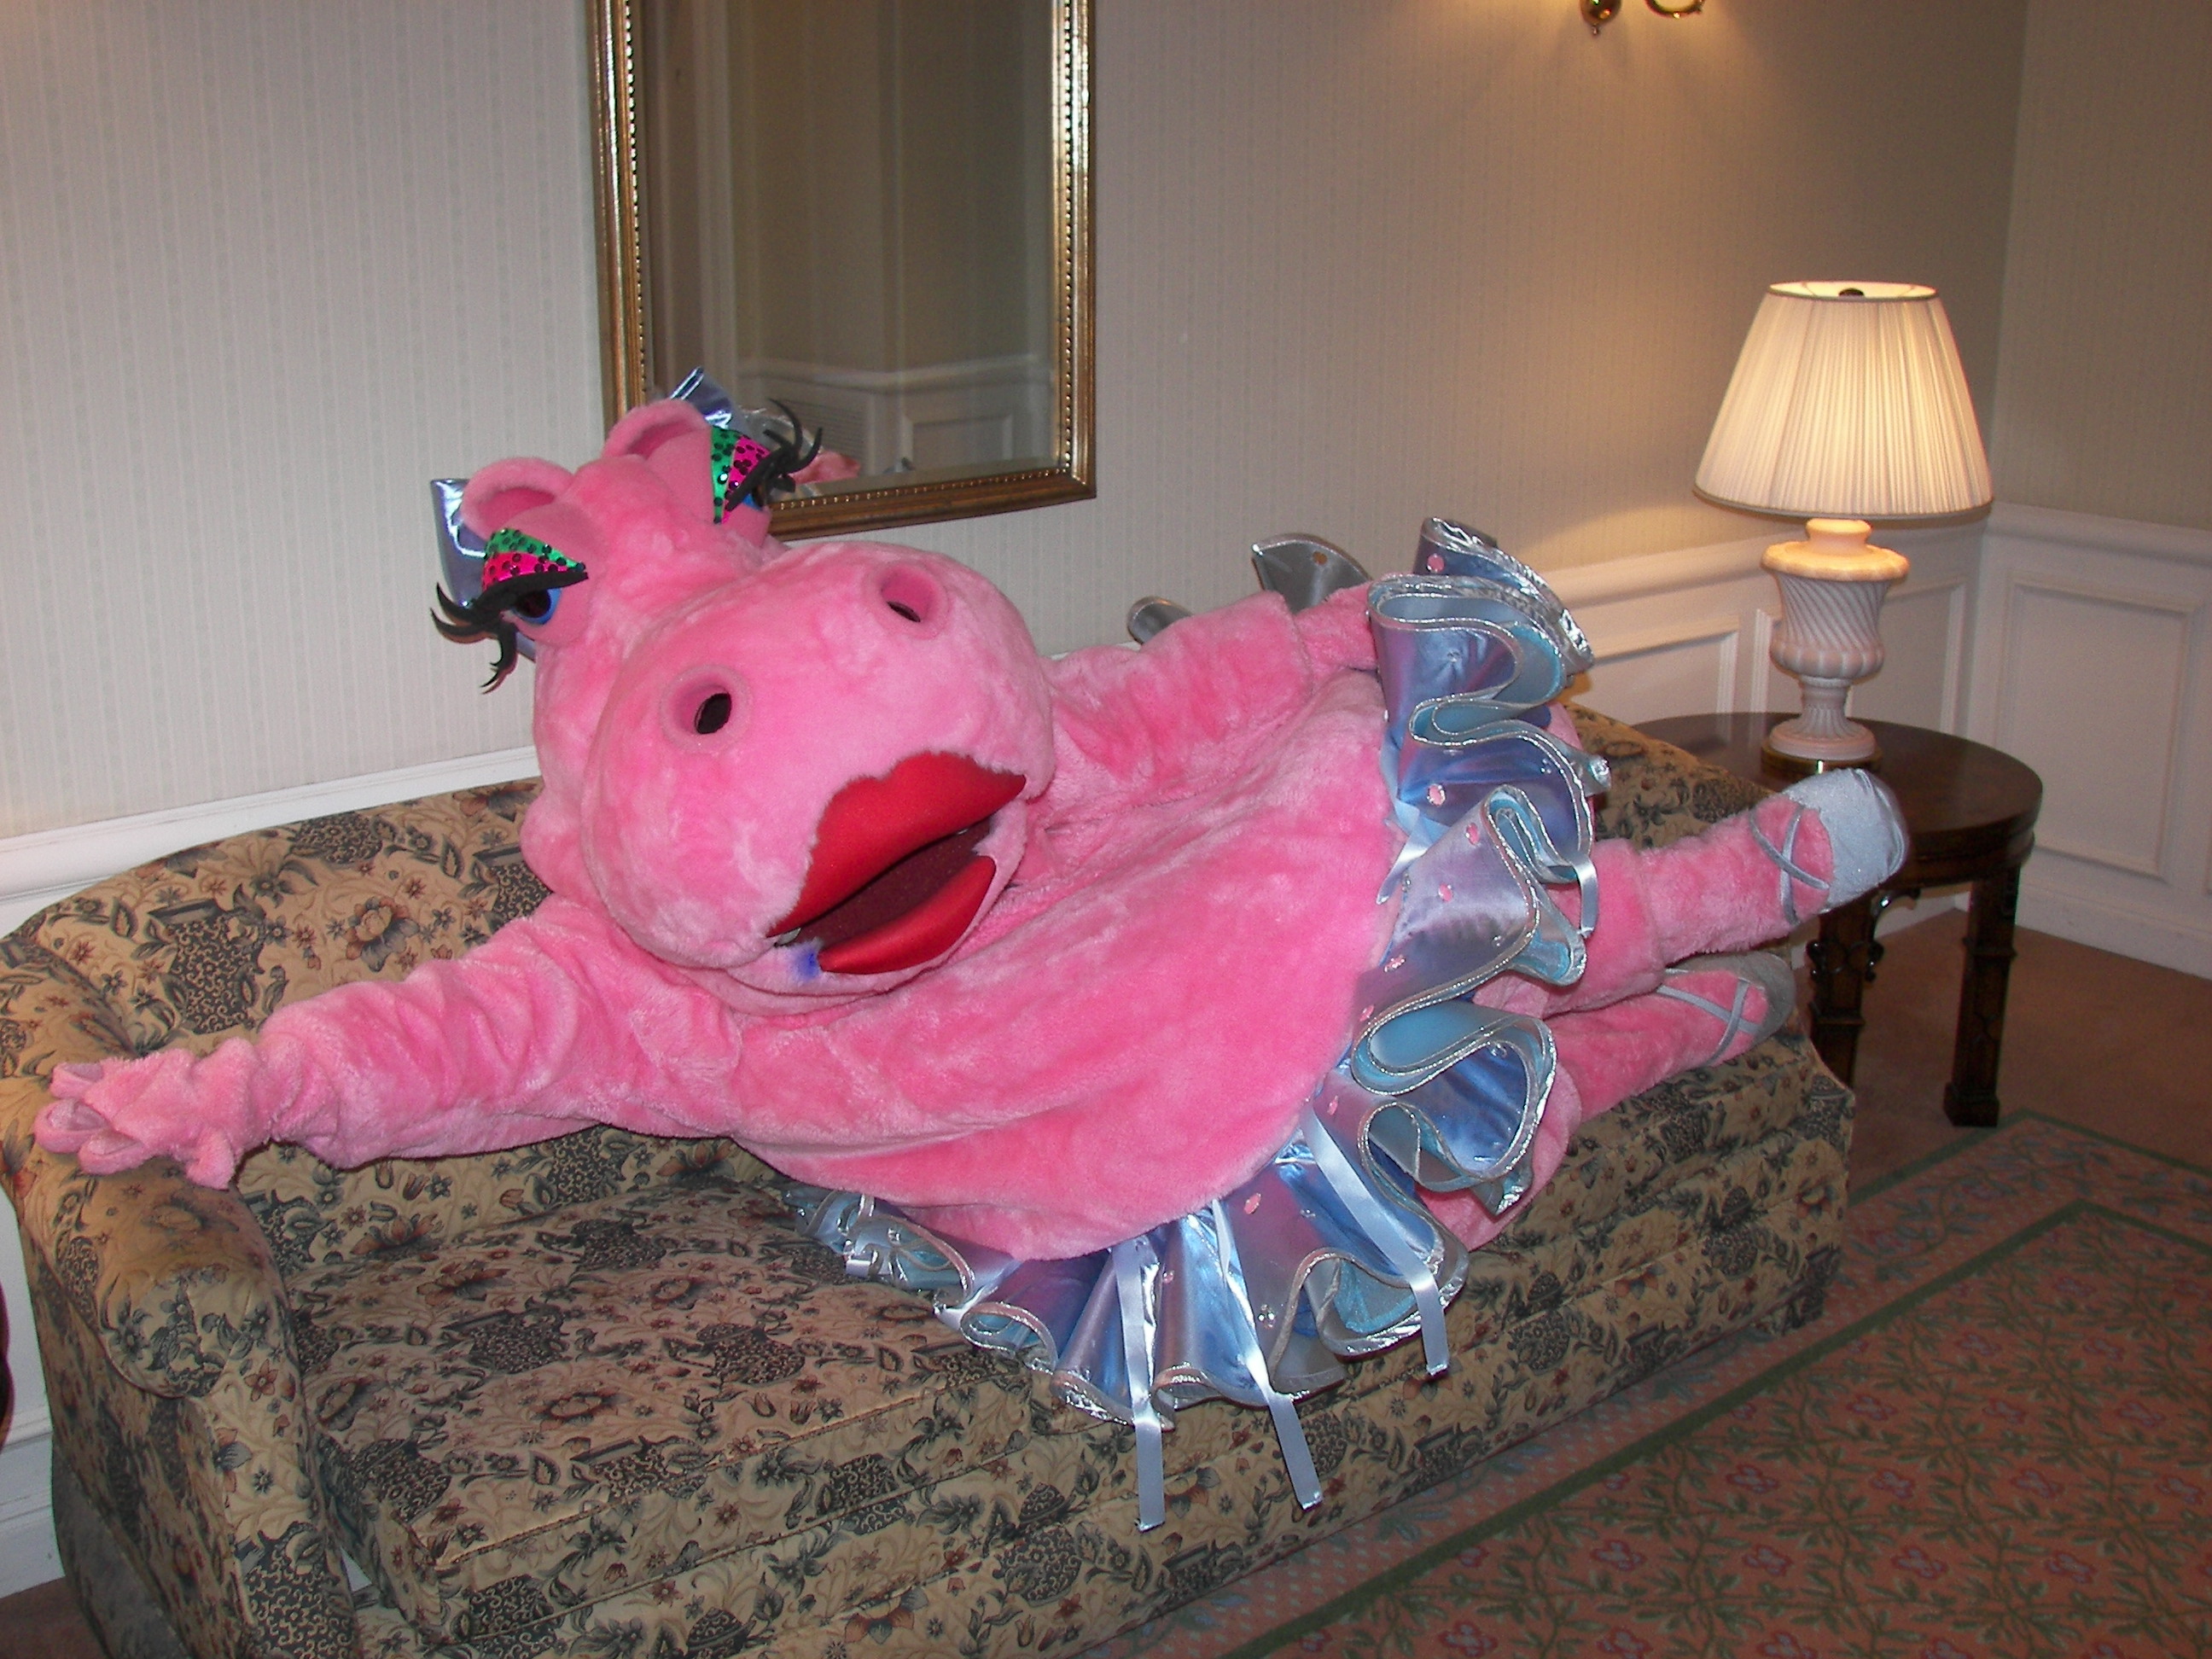 The Disneyland Hotel is the only place where you have a rare chance of meeting Hyacinth Hippo